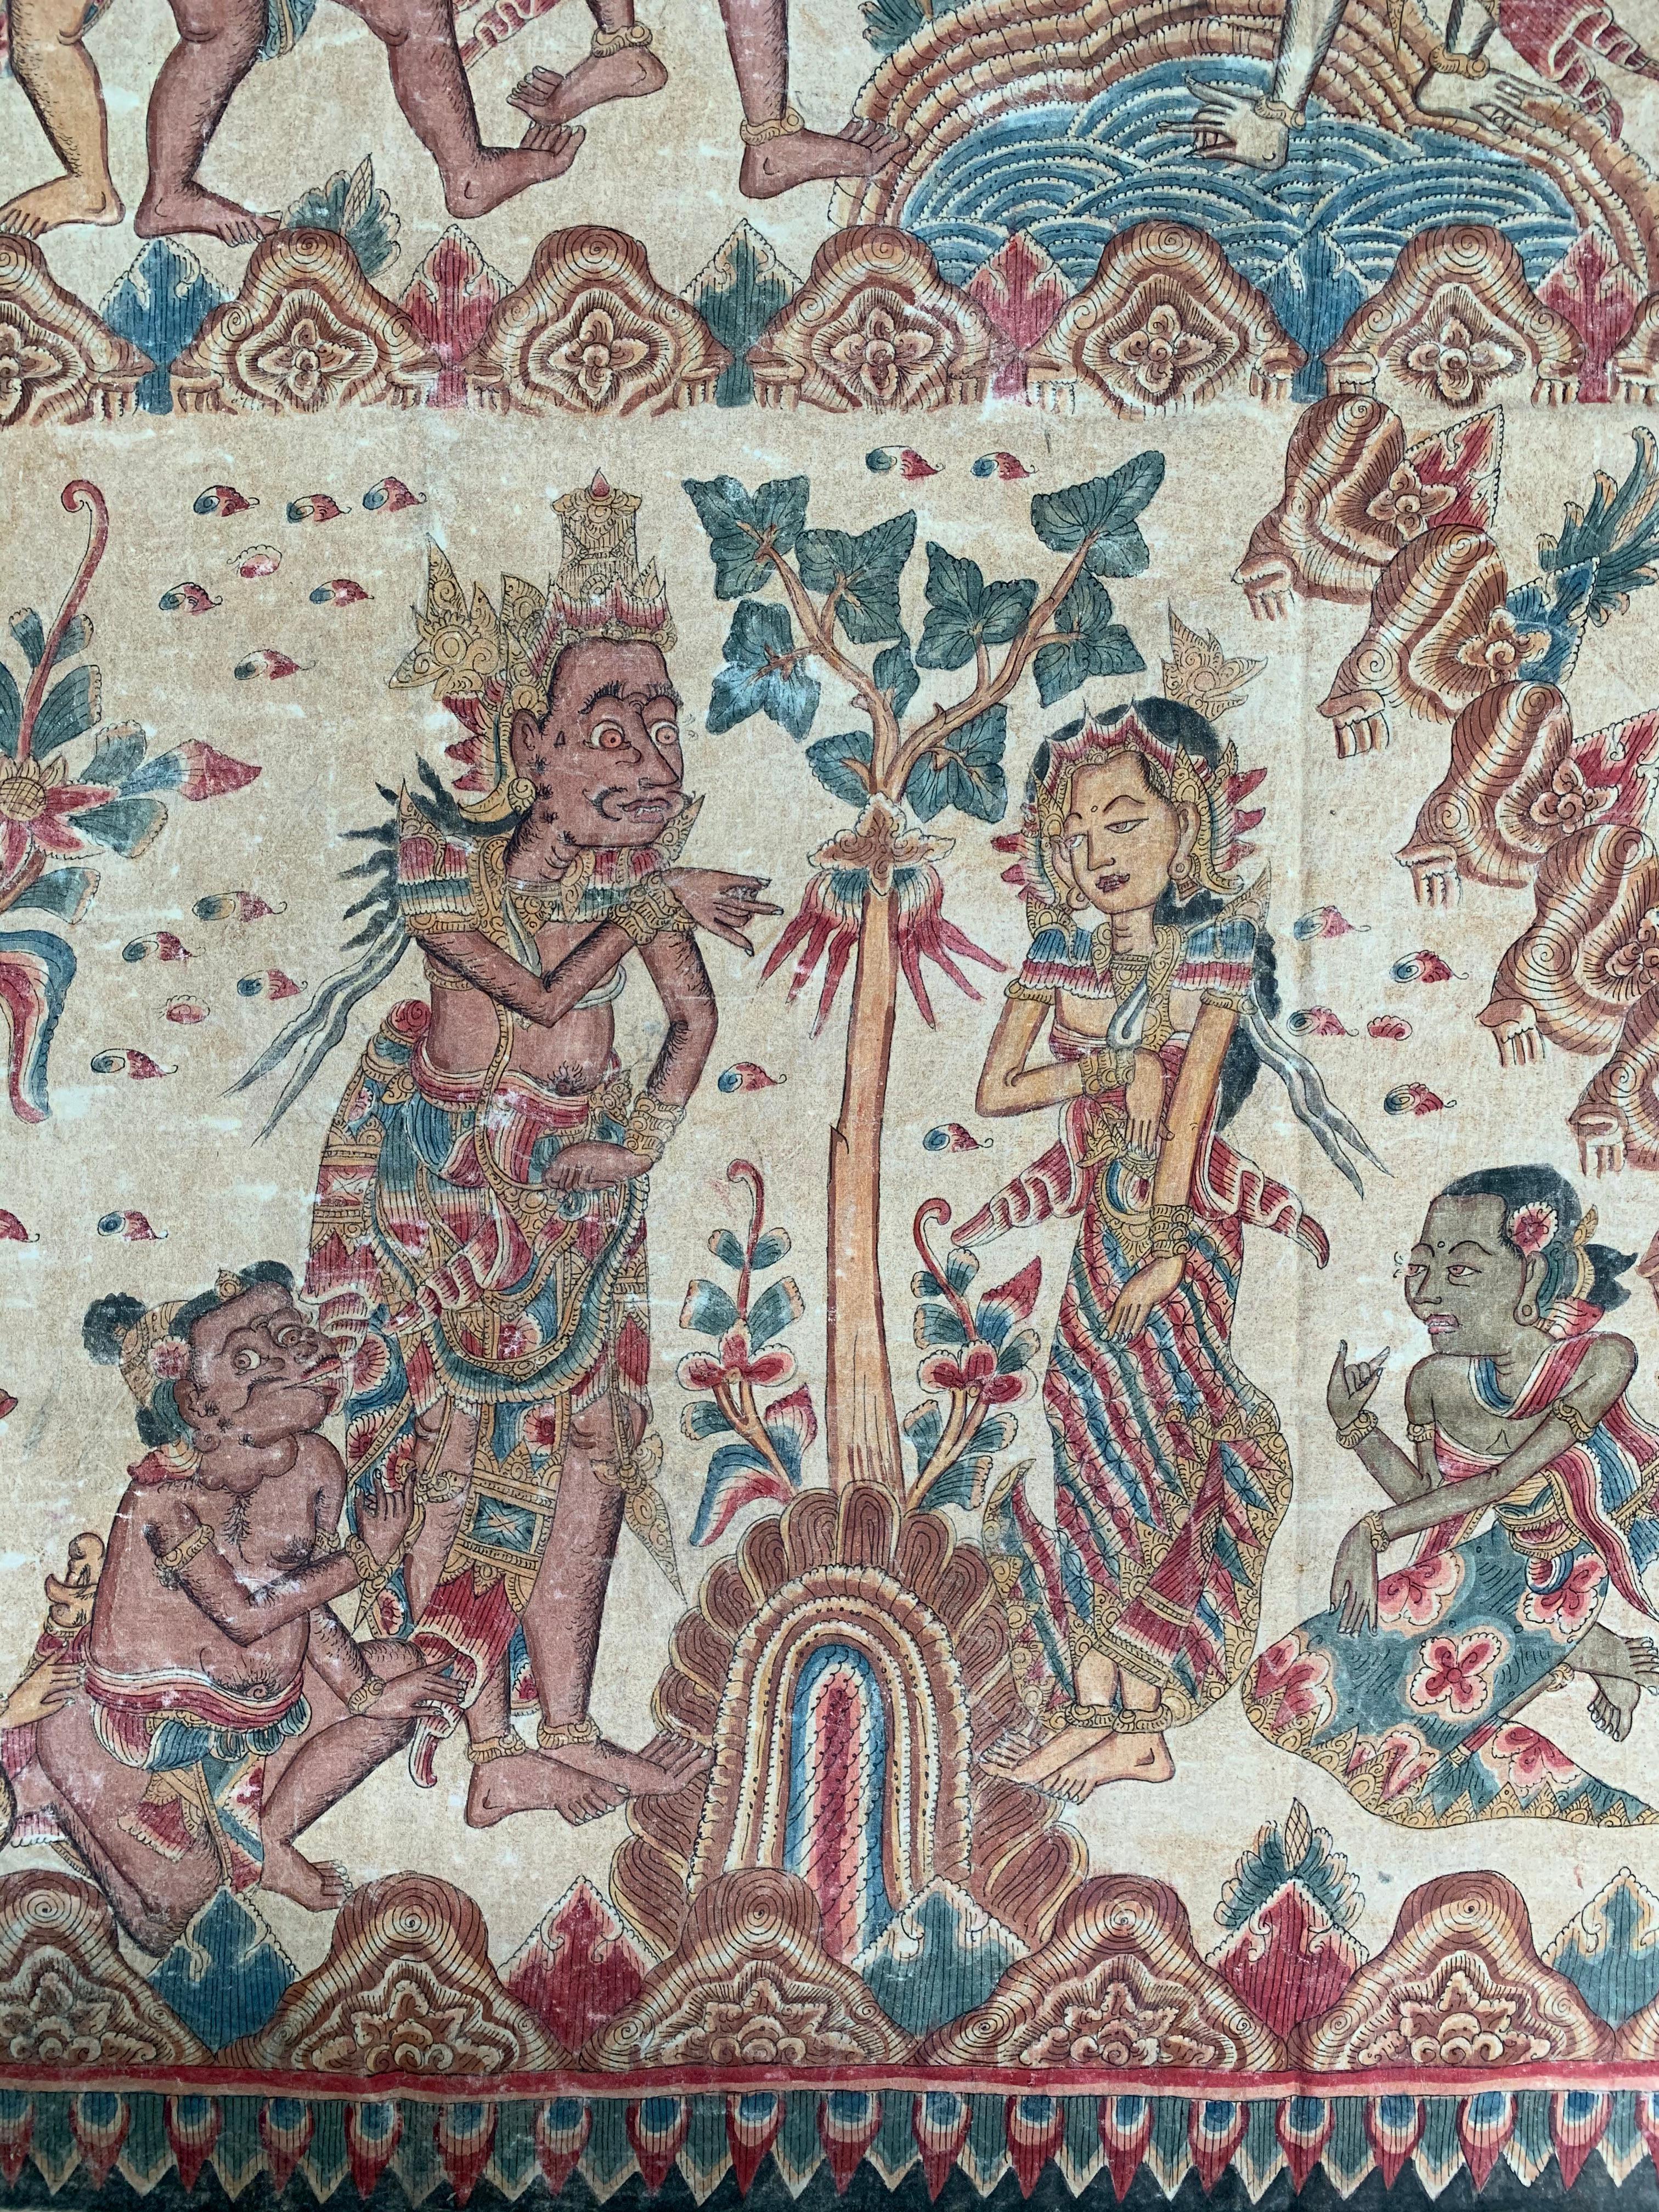 An early 20th Century 'Kamasan' cotton textile painting from Bali, Indonesia. The hand-painted image has great detail and depicts Balinese Hindu mythology. 

Dimensions: Height 154cm x Width 139cm.